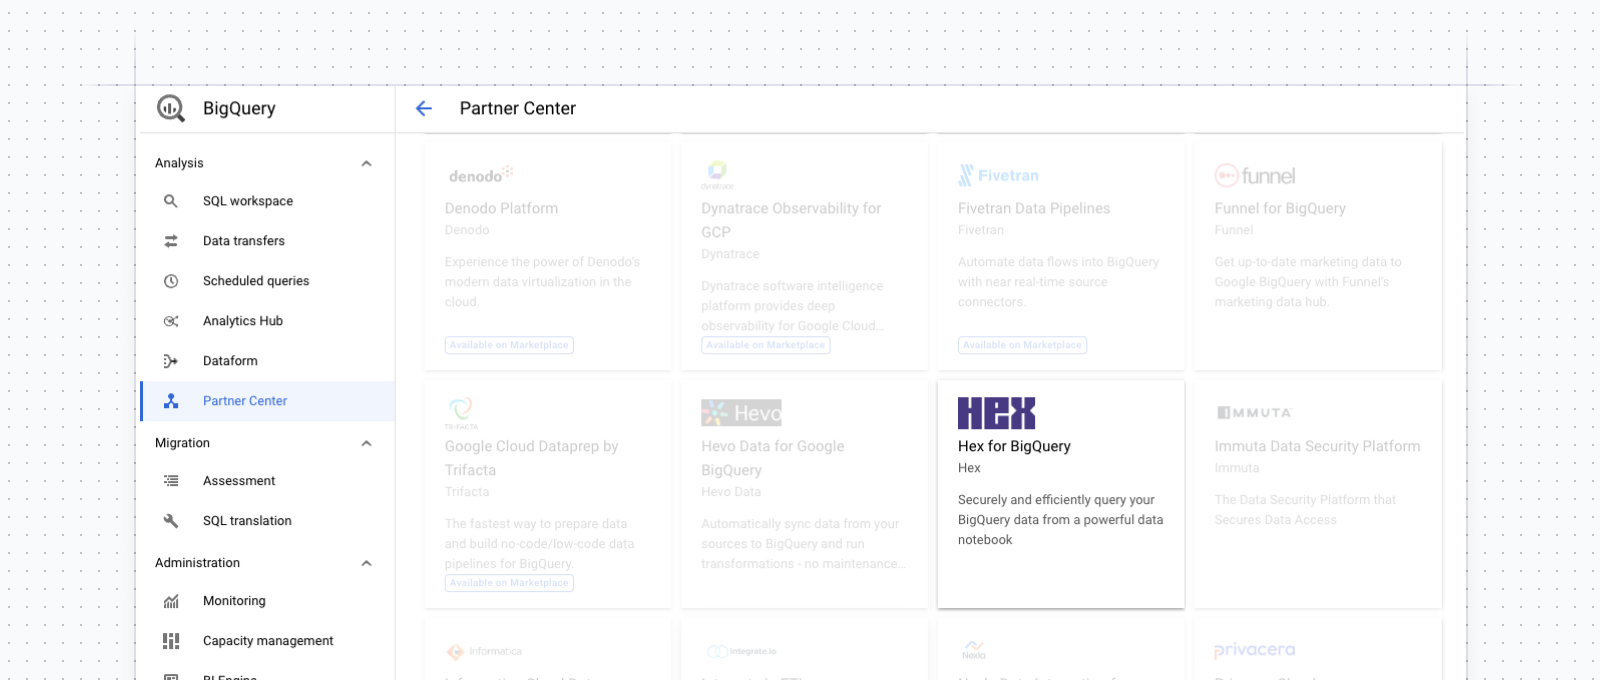 You can also start a free trial of Hex in BigQuery’s Partner Center!